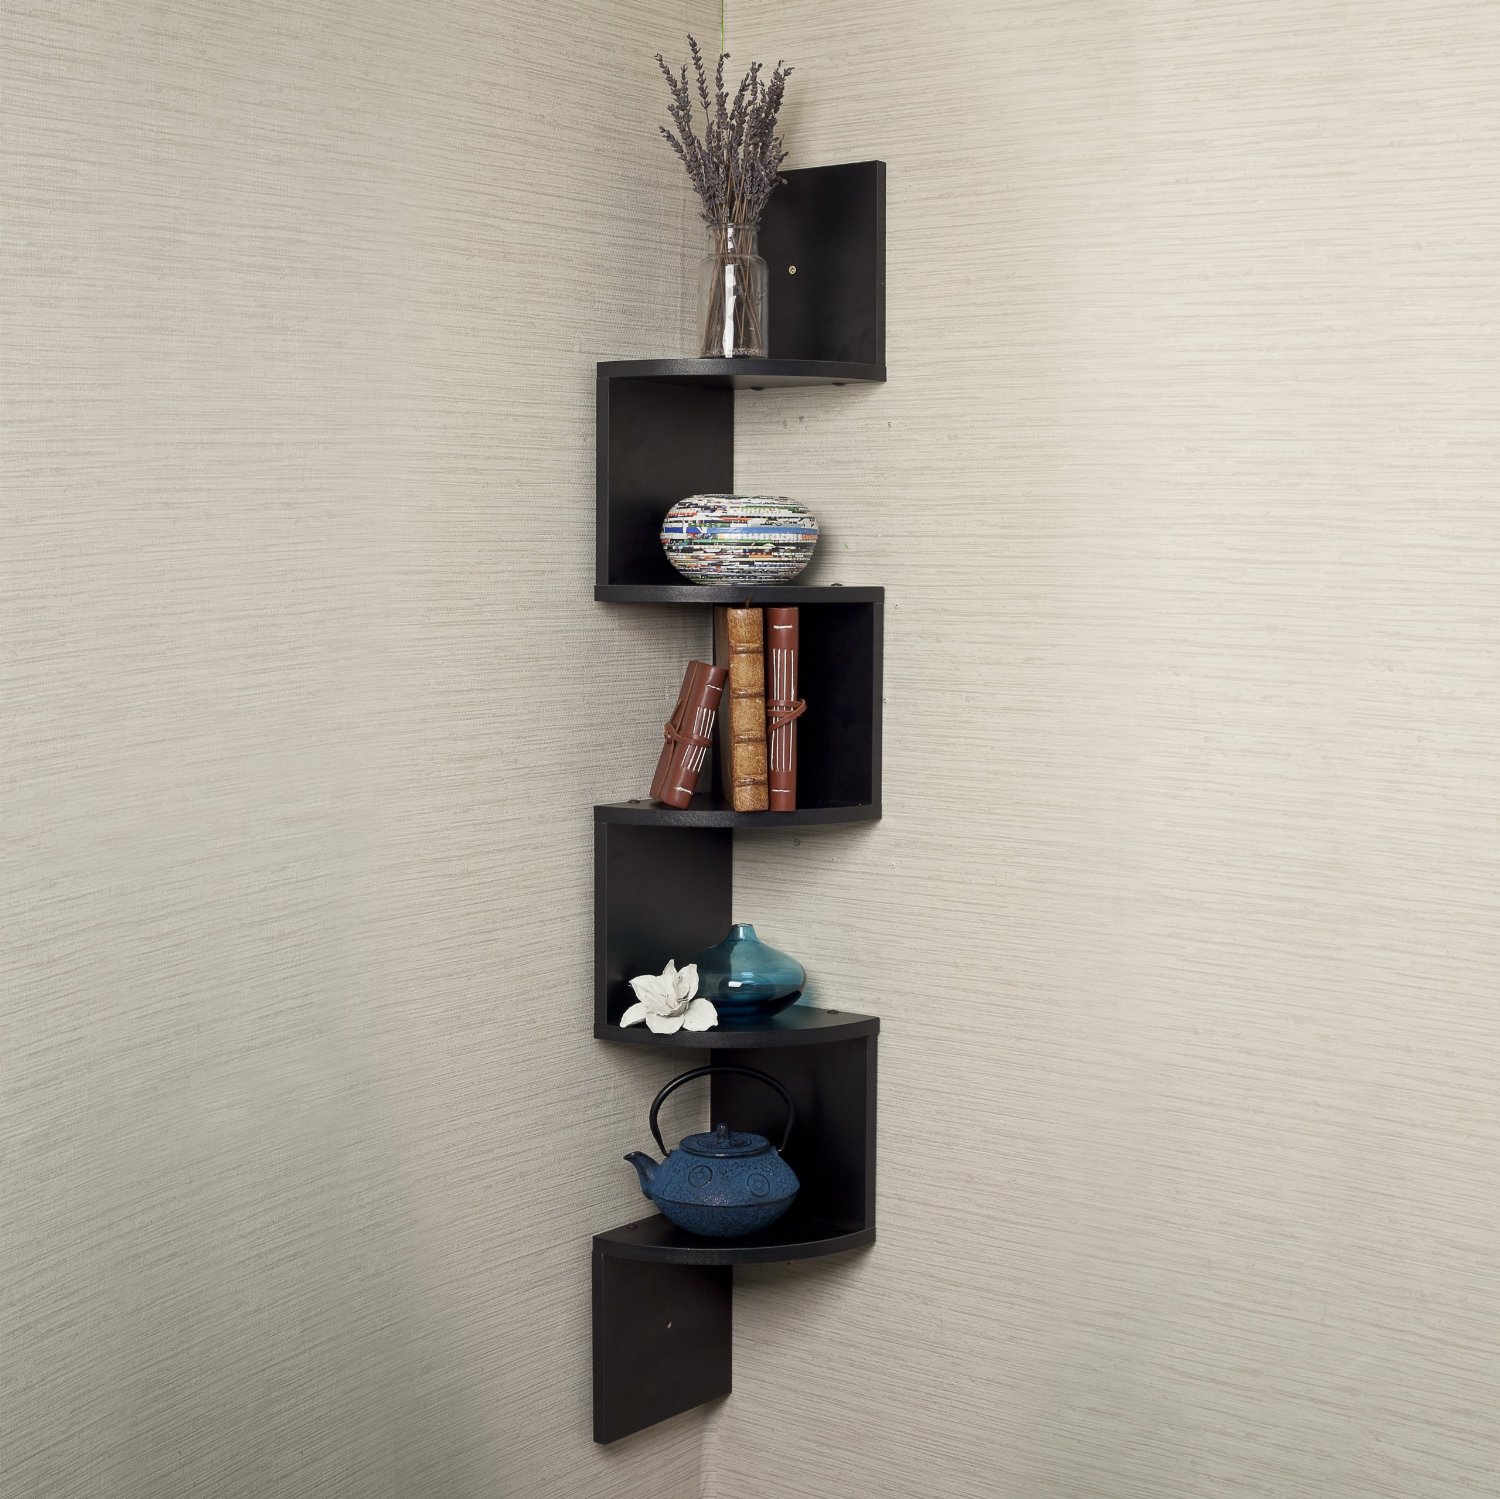 top black floating wall shelves review zigzag corner shelf mounted danya large mount laminate dvd player bracket industrial shelving decor grain leather executive chair video